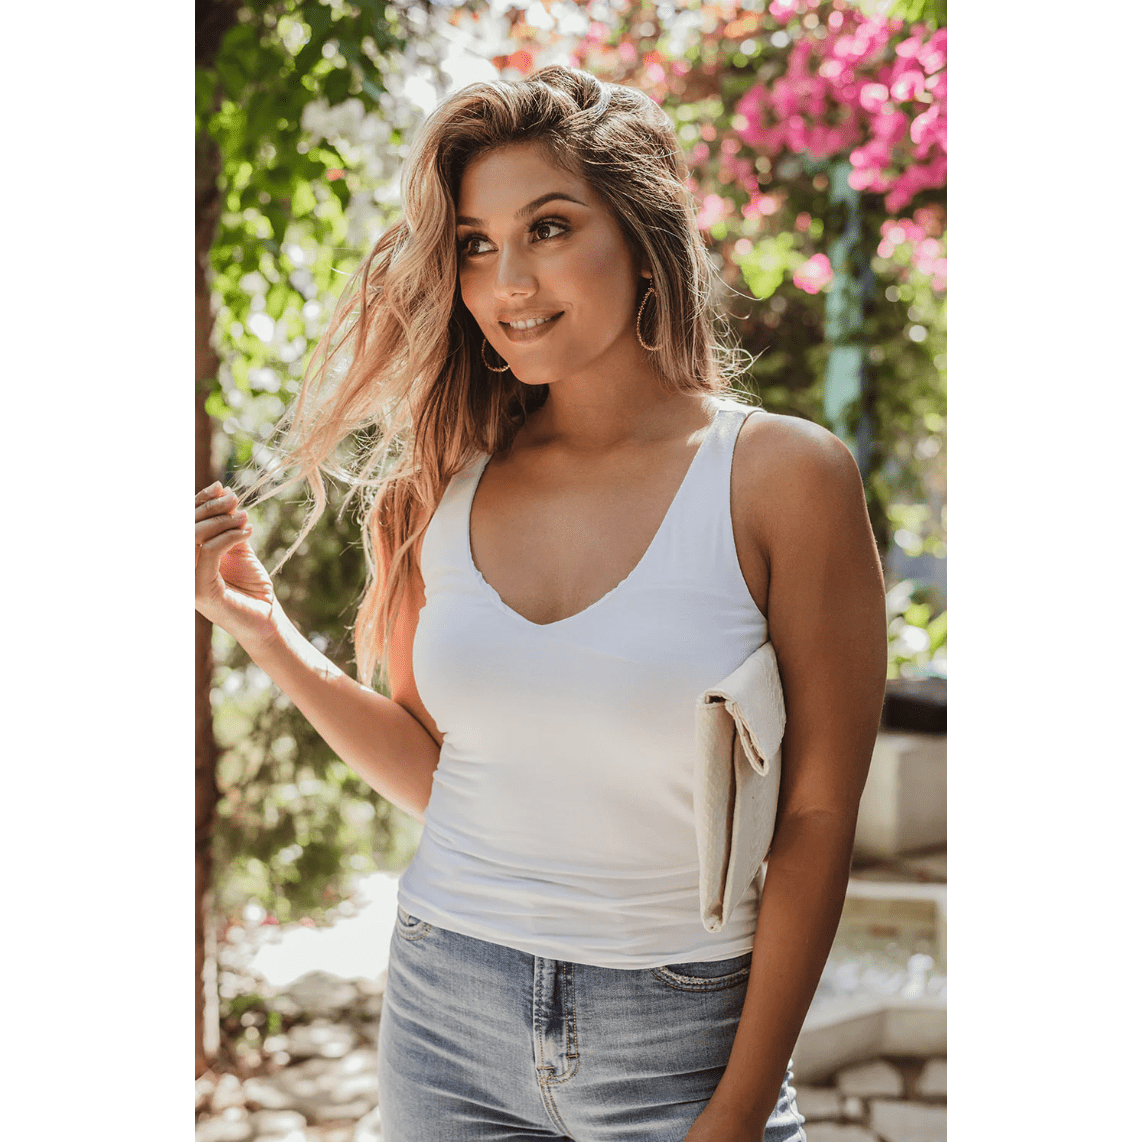 Veronica M Jersey Double Lined Tank V-Neck Top in White and Denim - Jaunts Boutique 